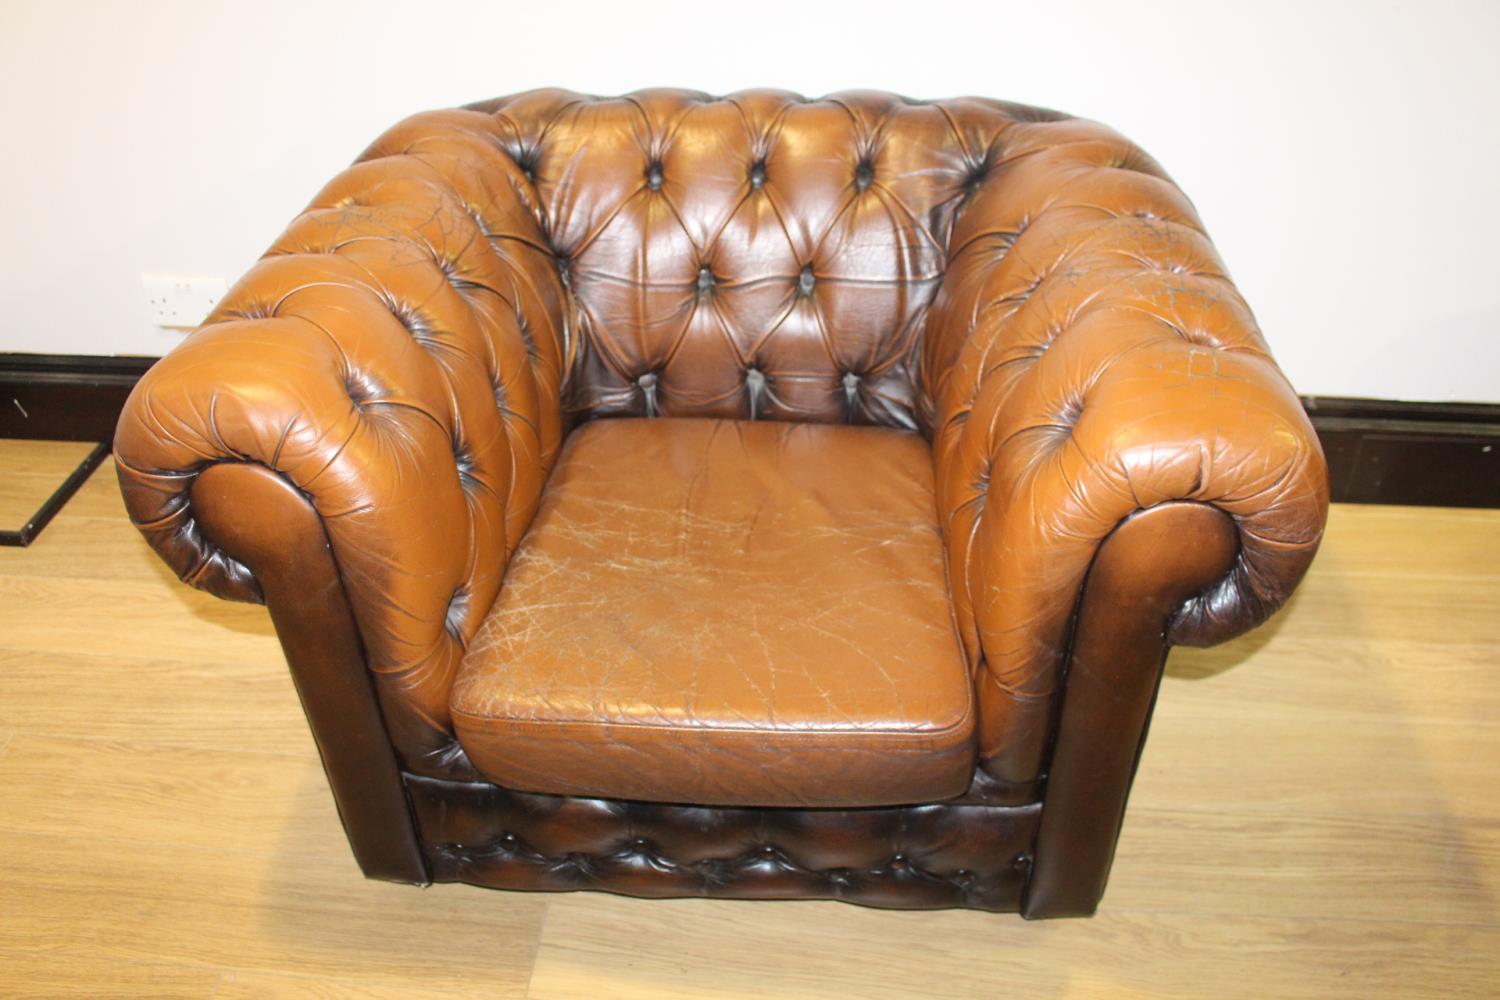 Excellent quality leather chesterfield three piece deep buttoned upholstered suite - Image 4 of 4